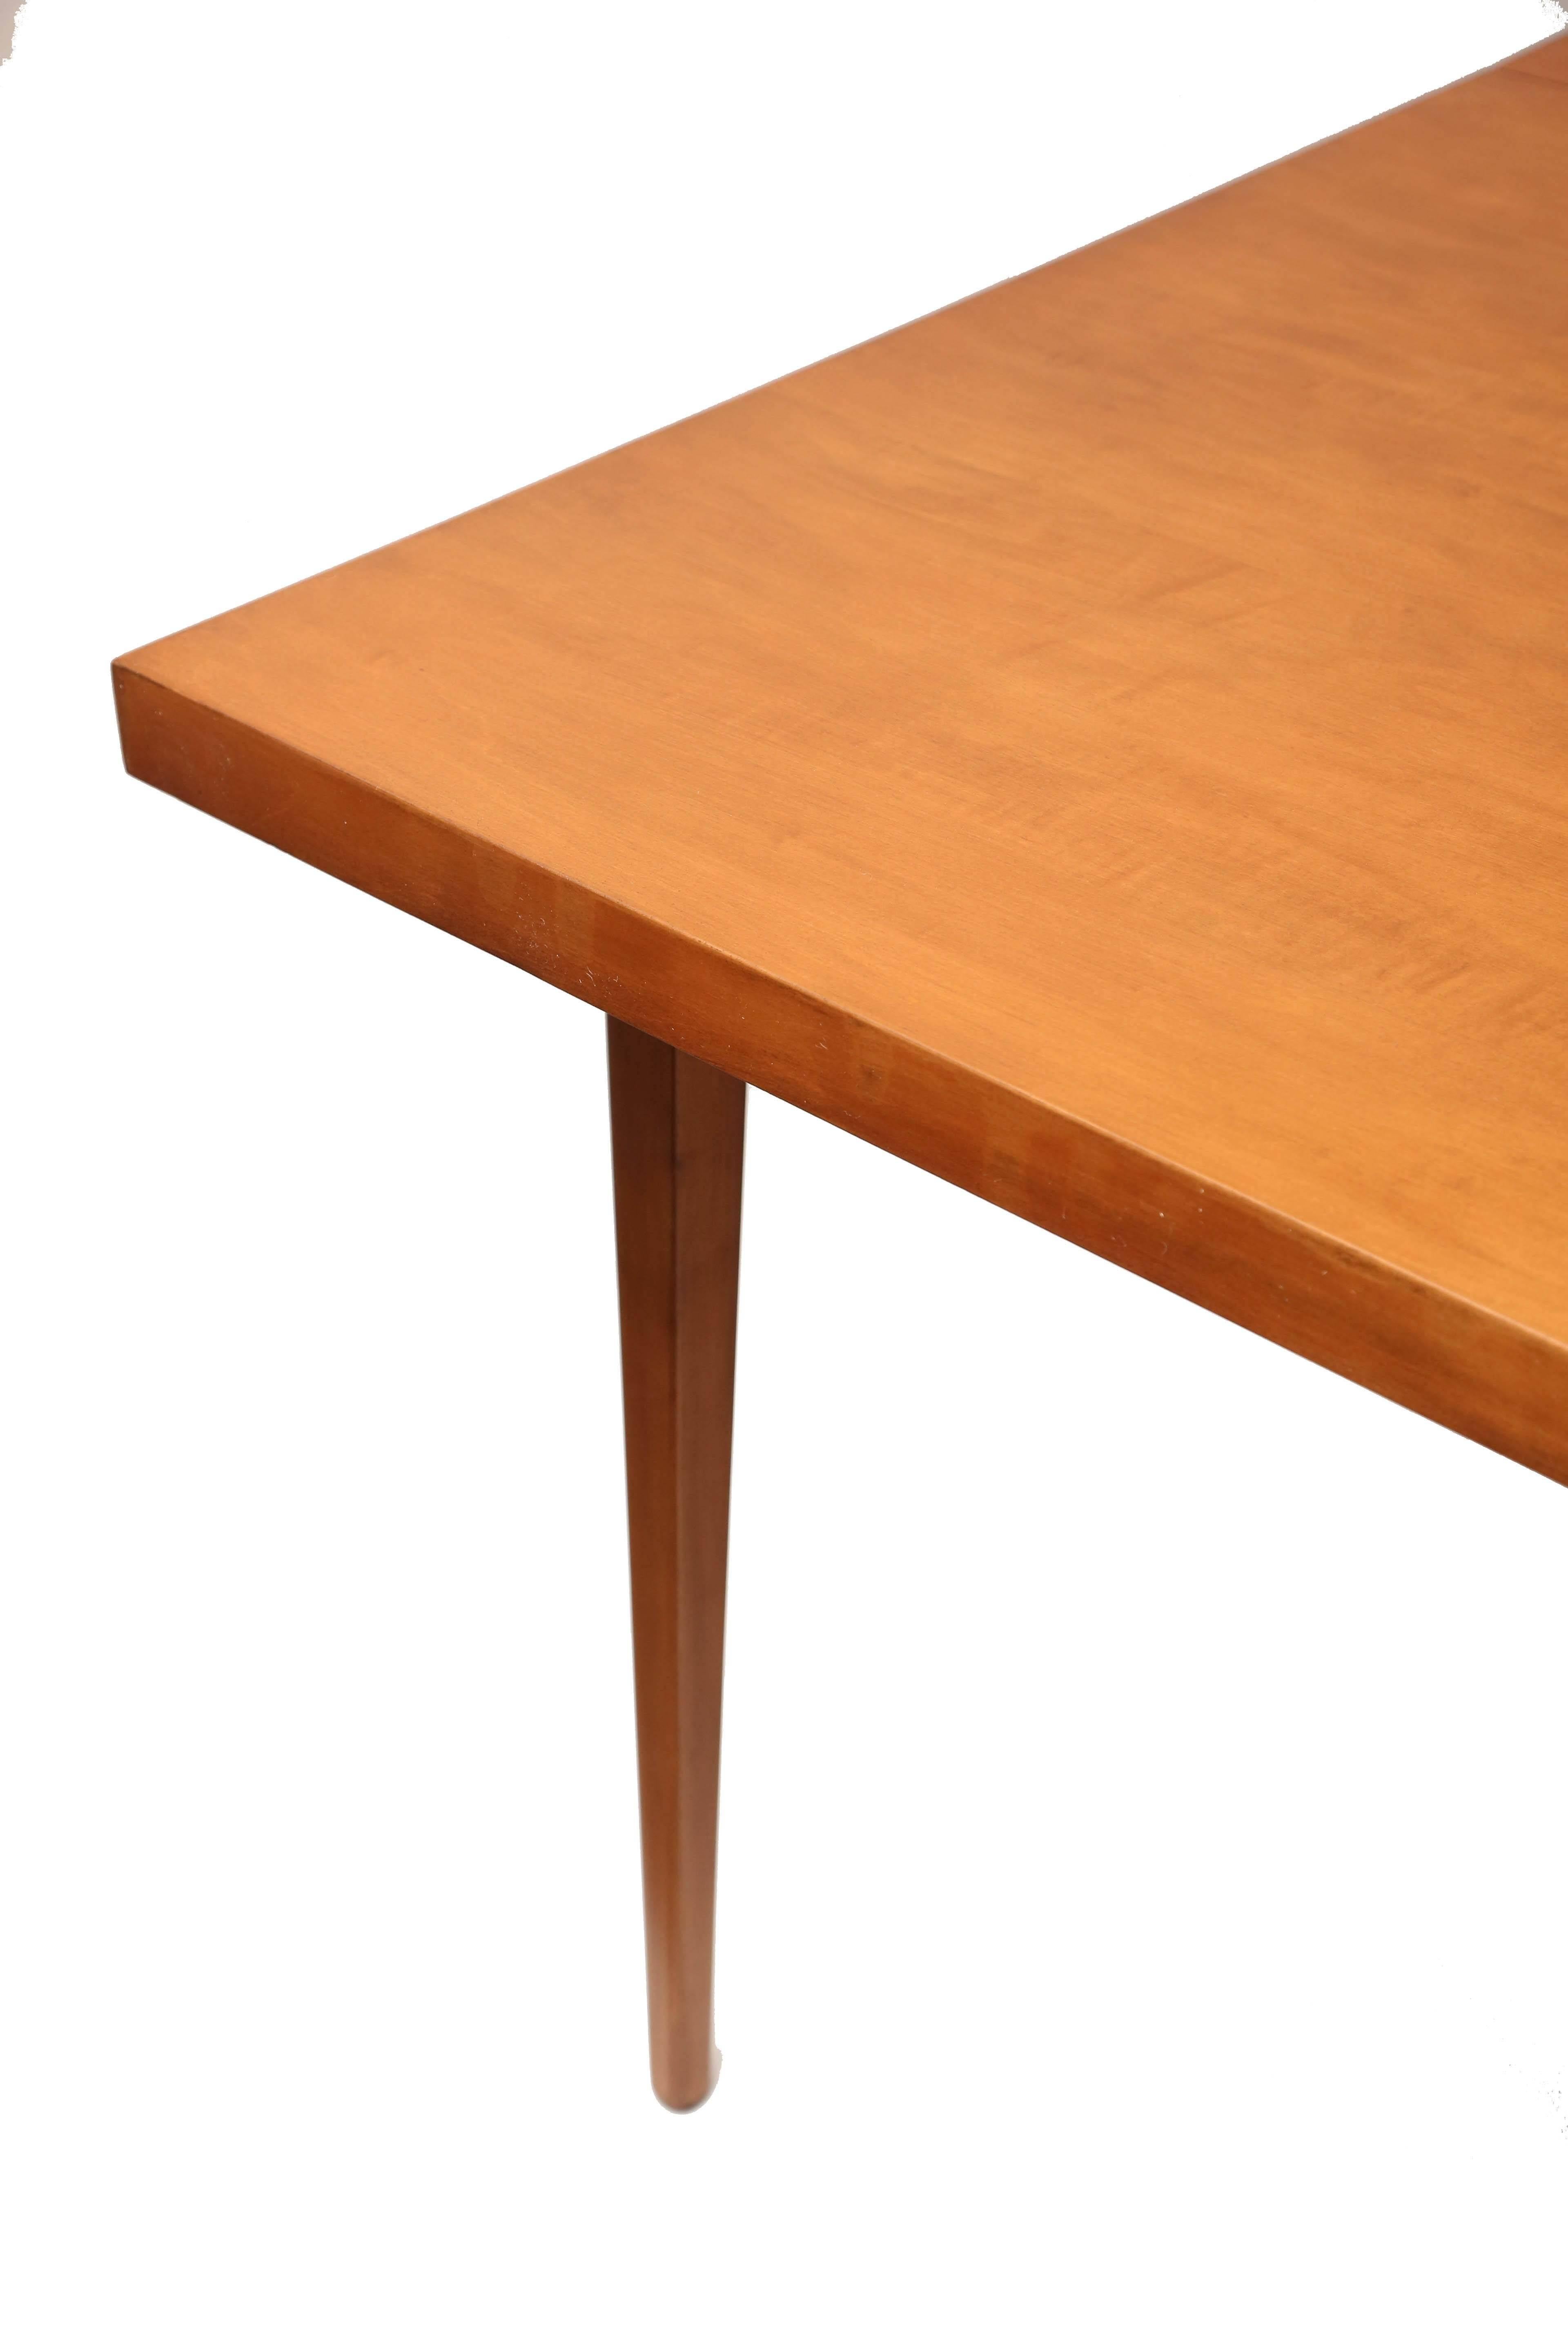 Paul McCobb Dining Table with Two Leaves, USA, 1960s In Excellent Condition For Sale In Miami, FL